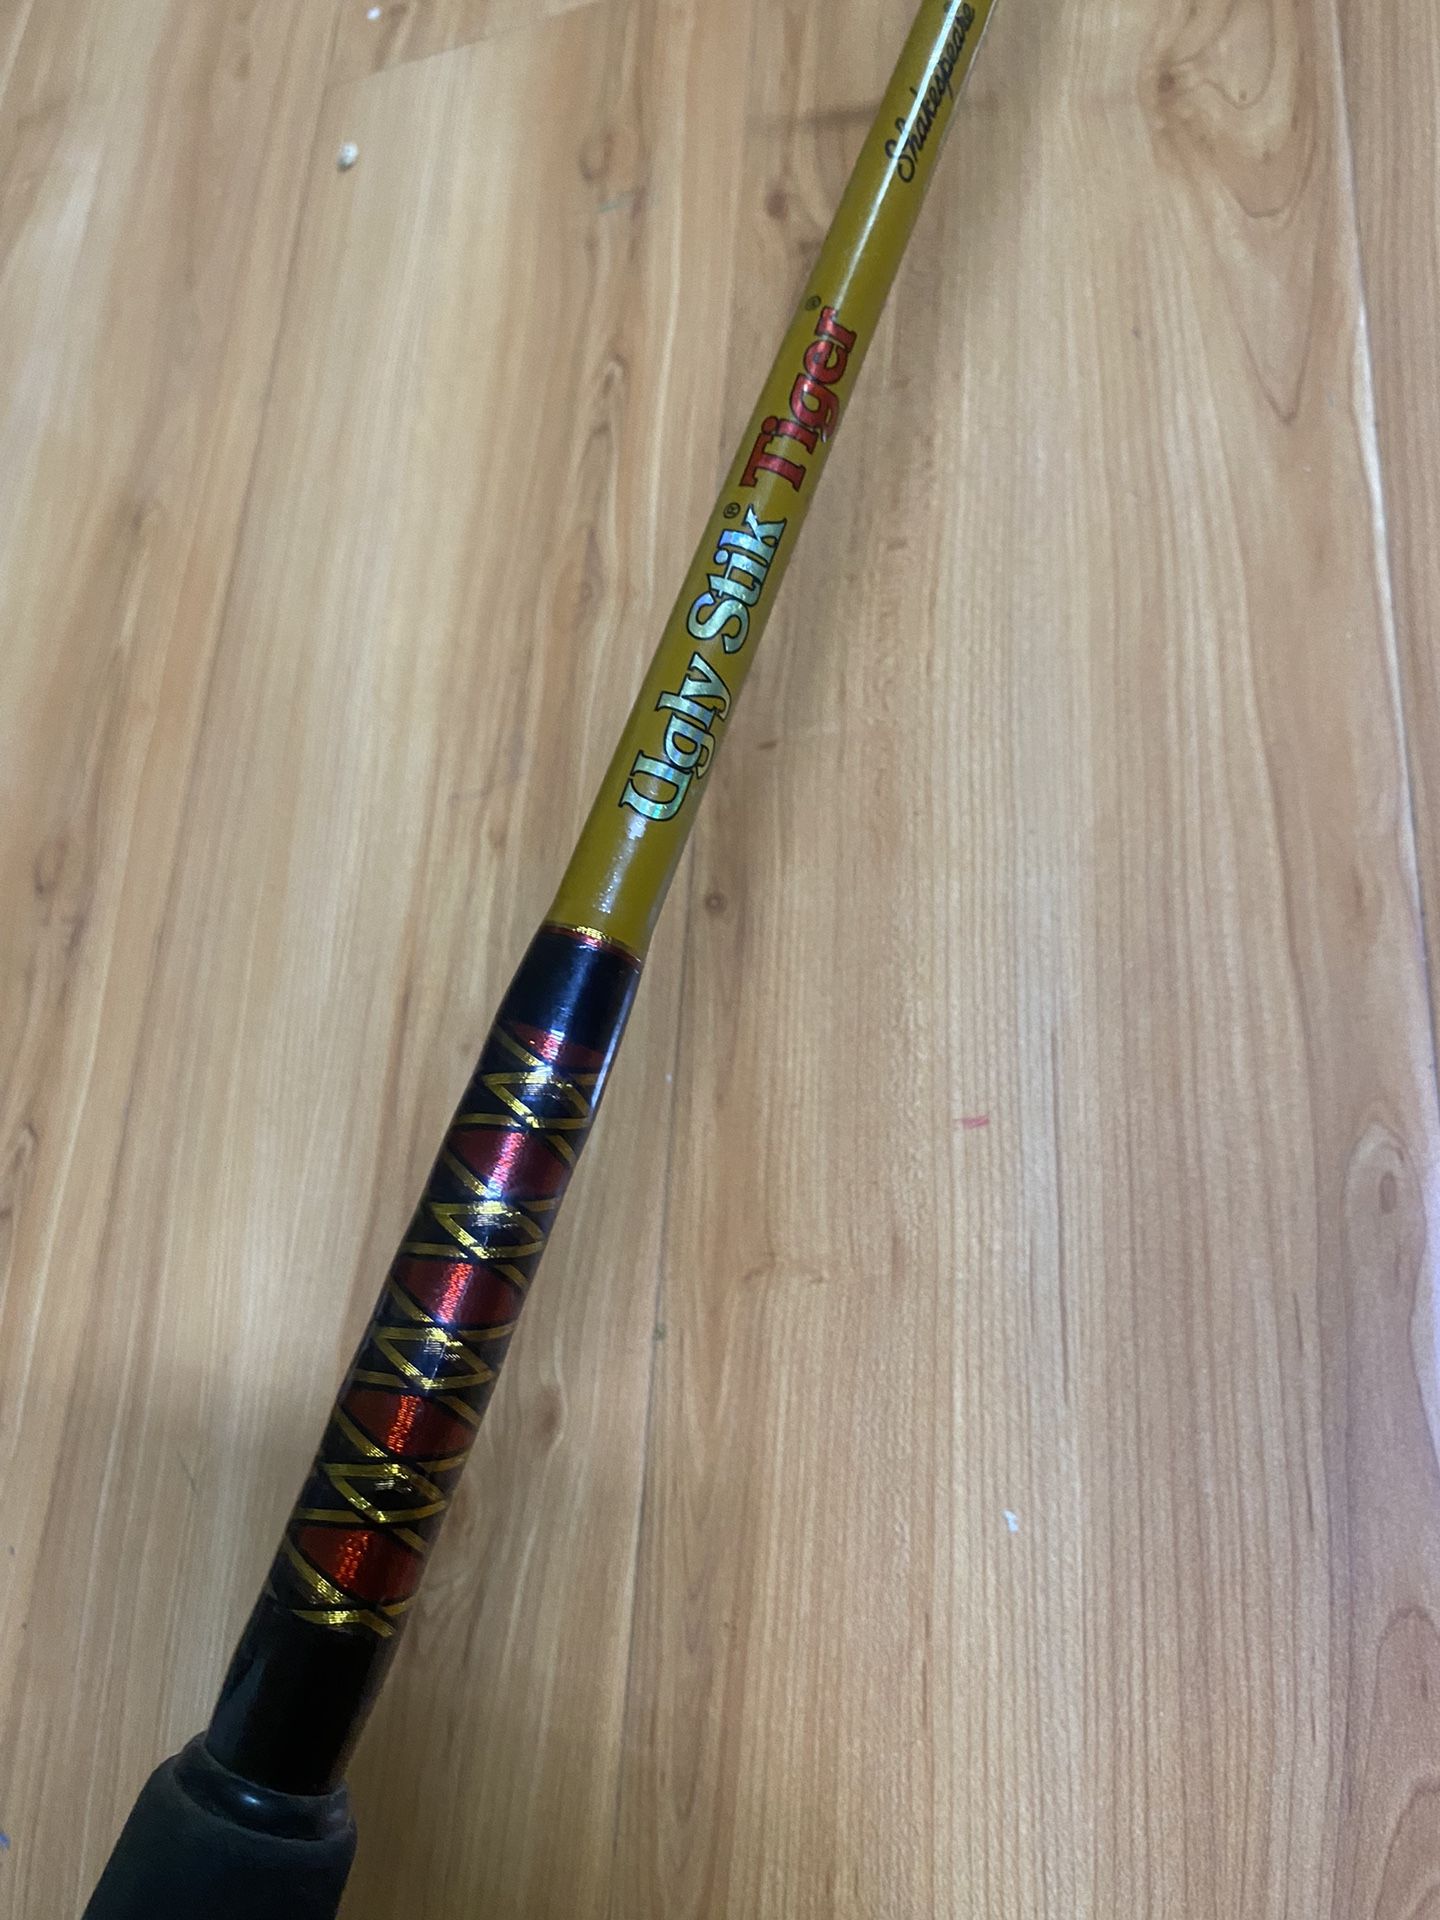 Ugly Stik Tiger Bws 2201 7ft 10-50lb Spinning Rod $60 for Sale in